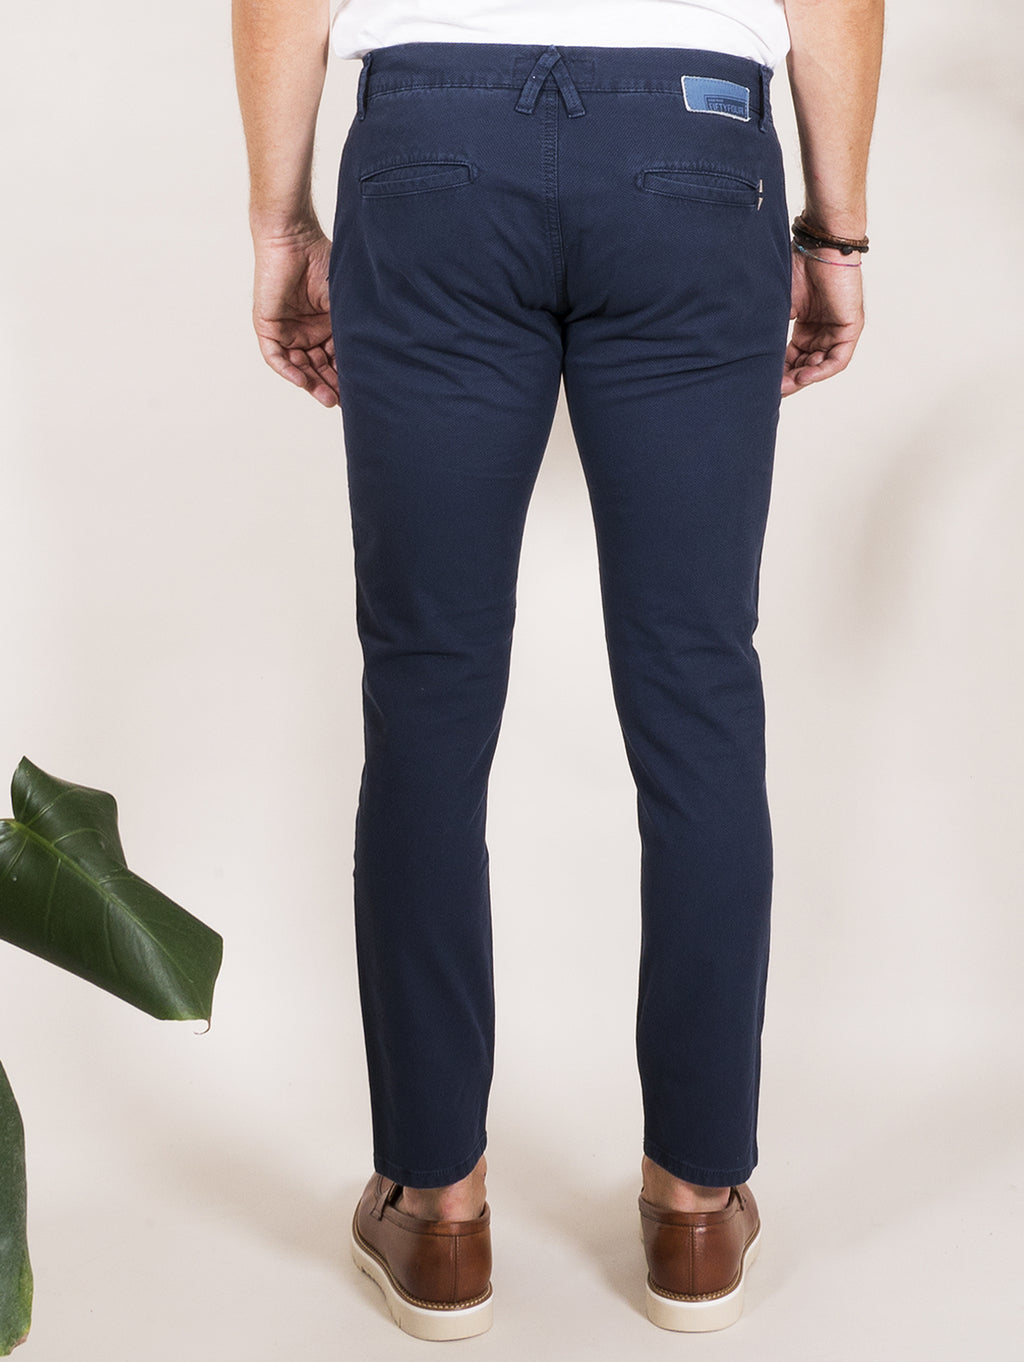 FIFTY FOUR PANTALONI CHINO IN COTONE  -20%